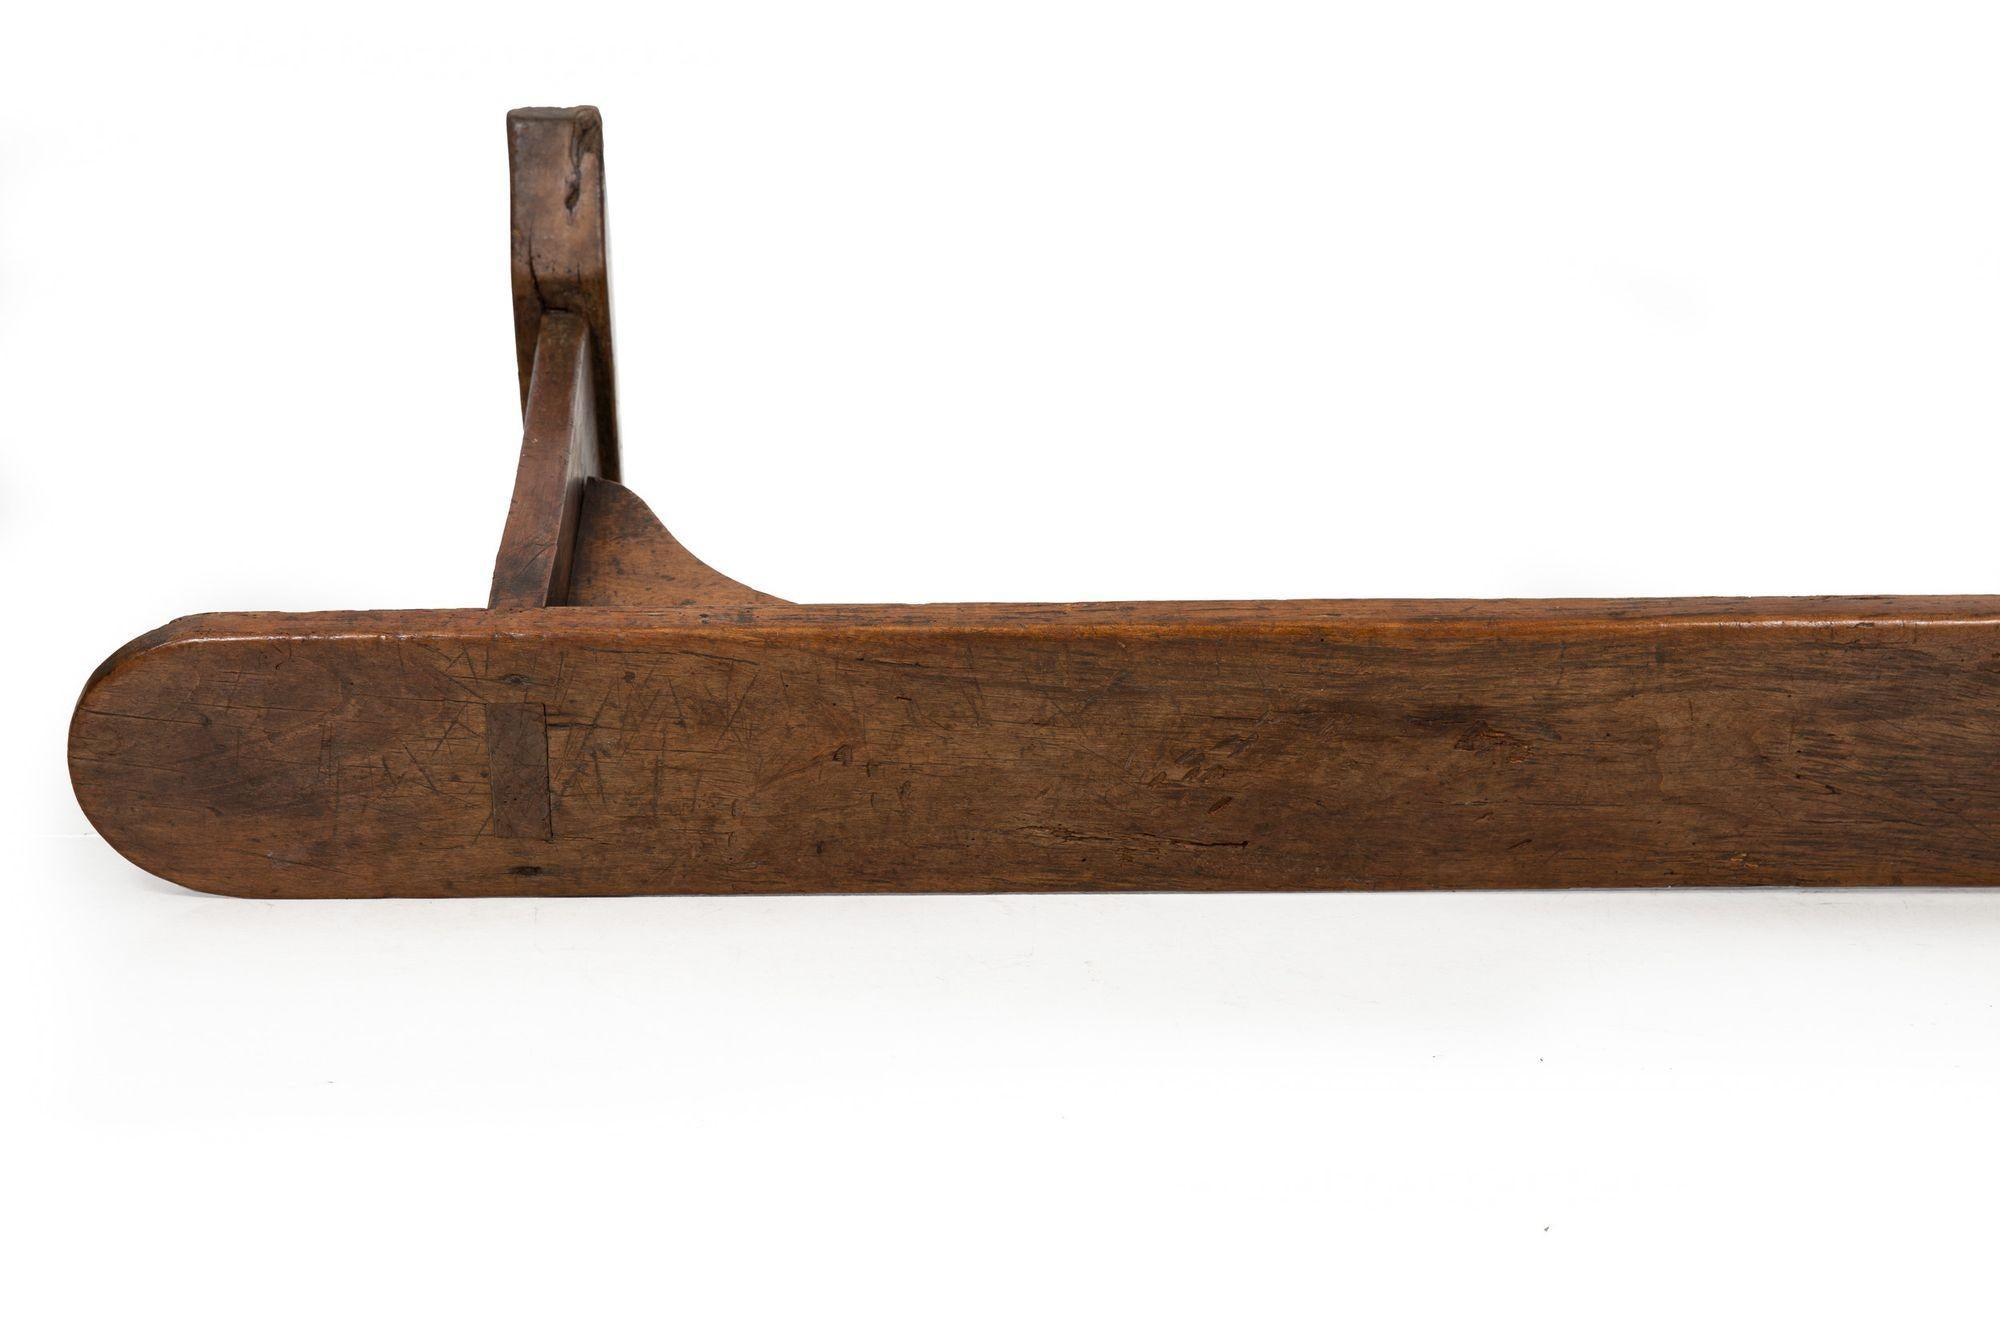 circa 1750 English Georgian Patinated and Worn Elm Trestle Bench For Sale 10